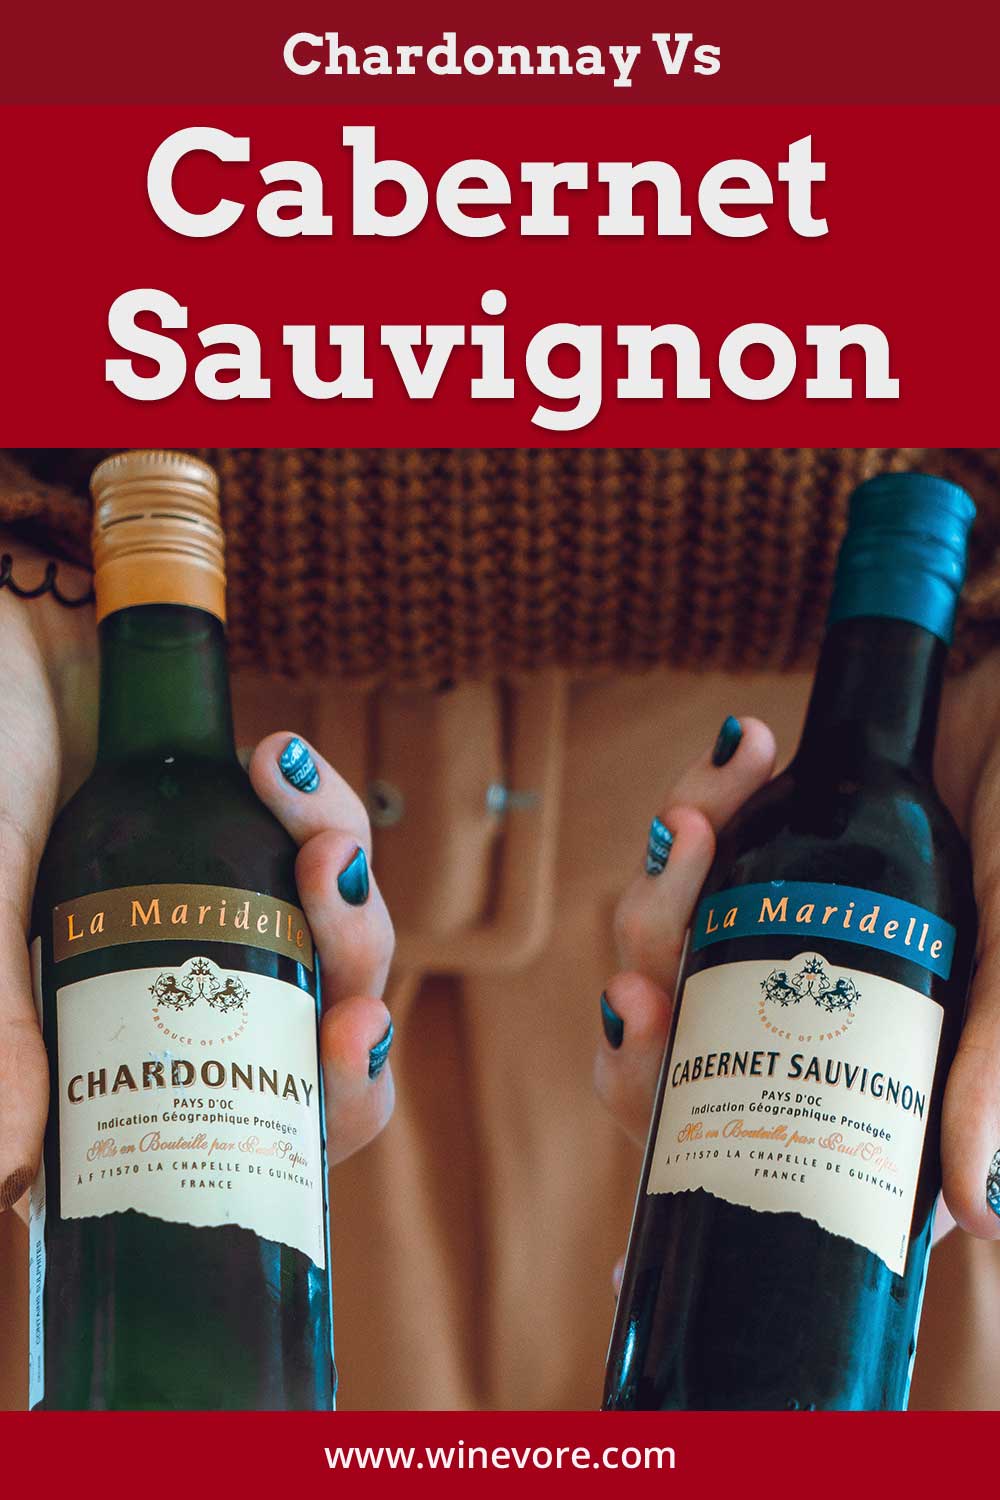 A bottle of Chardonnay and a bottle of Cabernet Sauvignon - difference between these two wines.